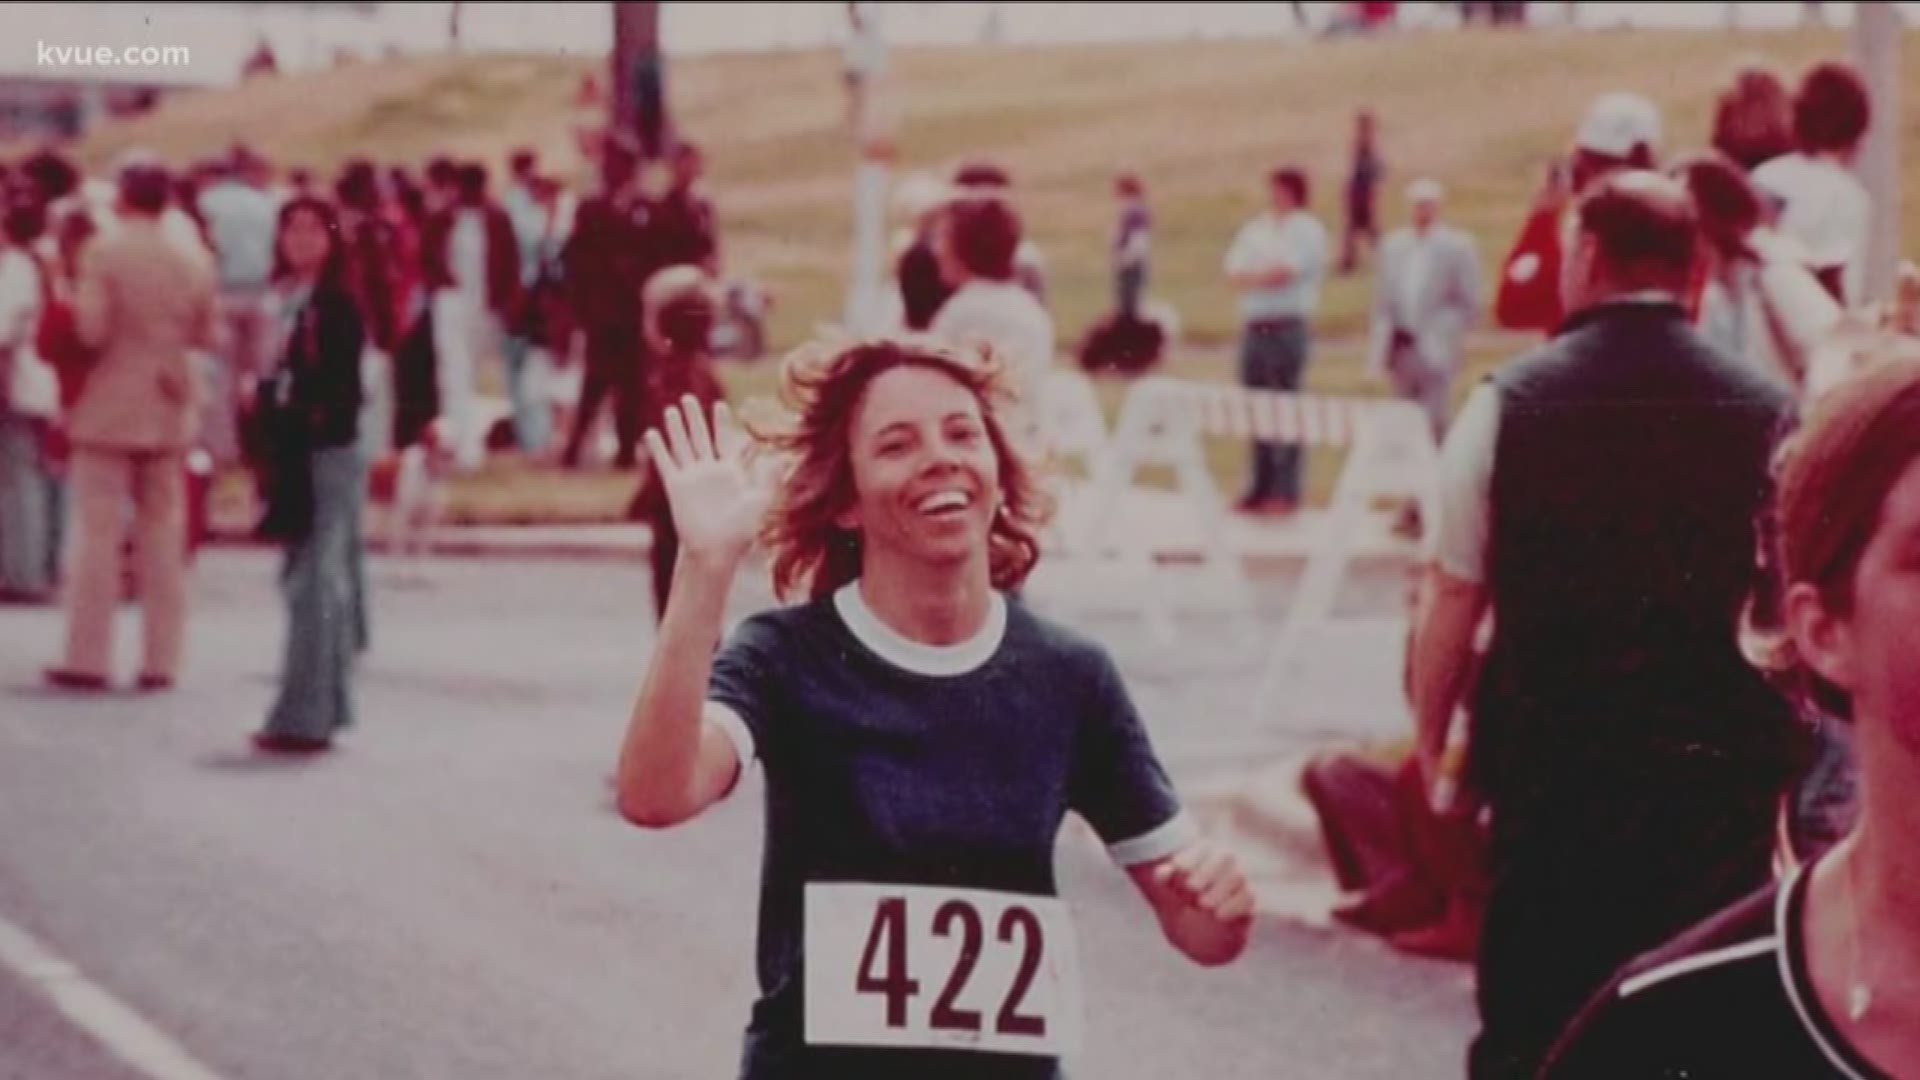 The Statesman Capitol 10K began in 1978 and like most things in Austin, it's just kept growing and growing.